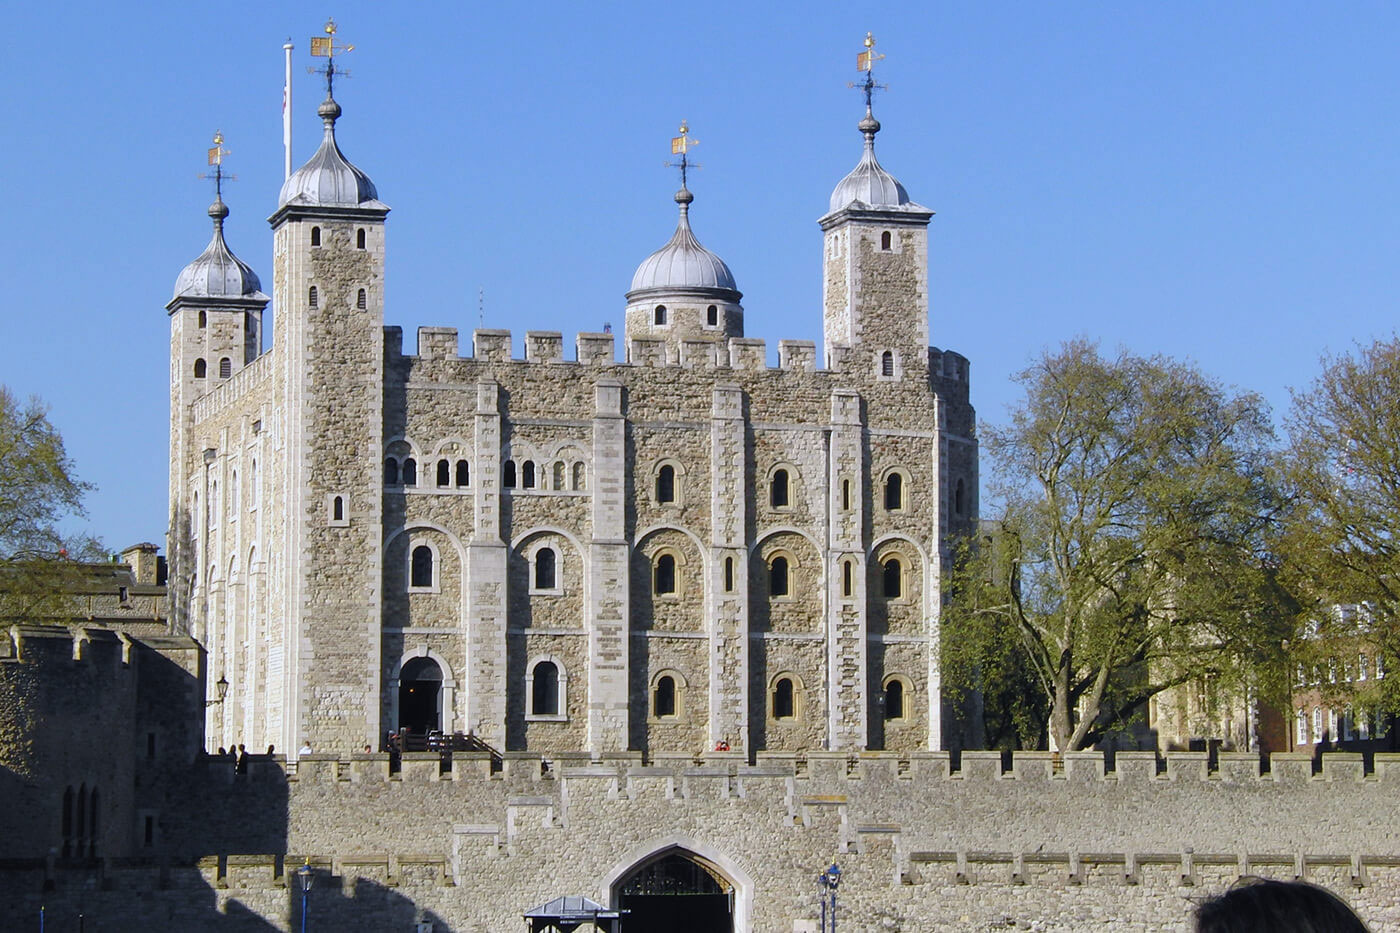 HM Tower of London